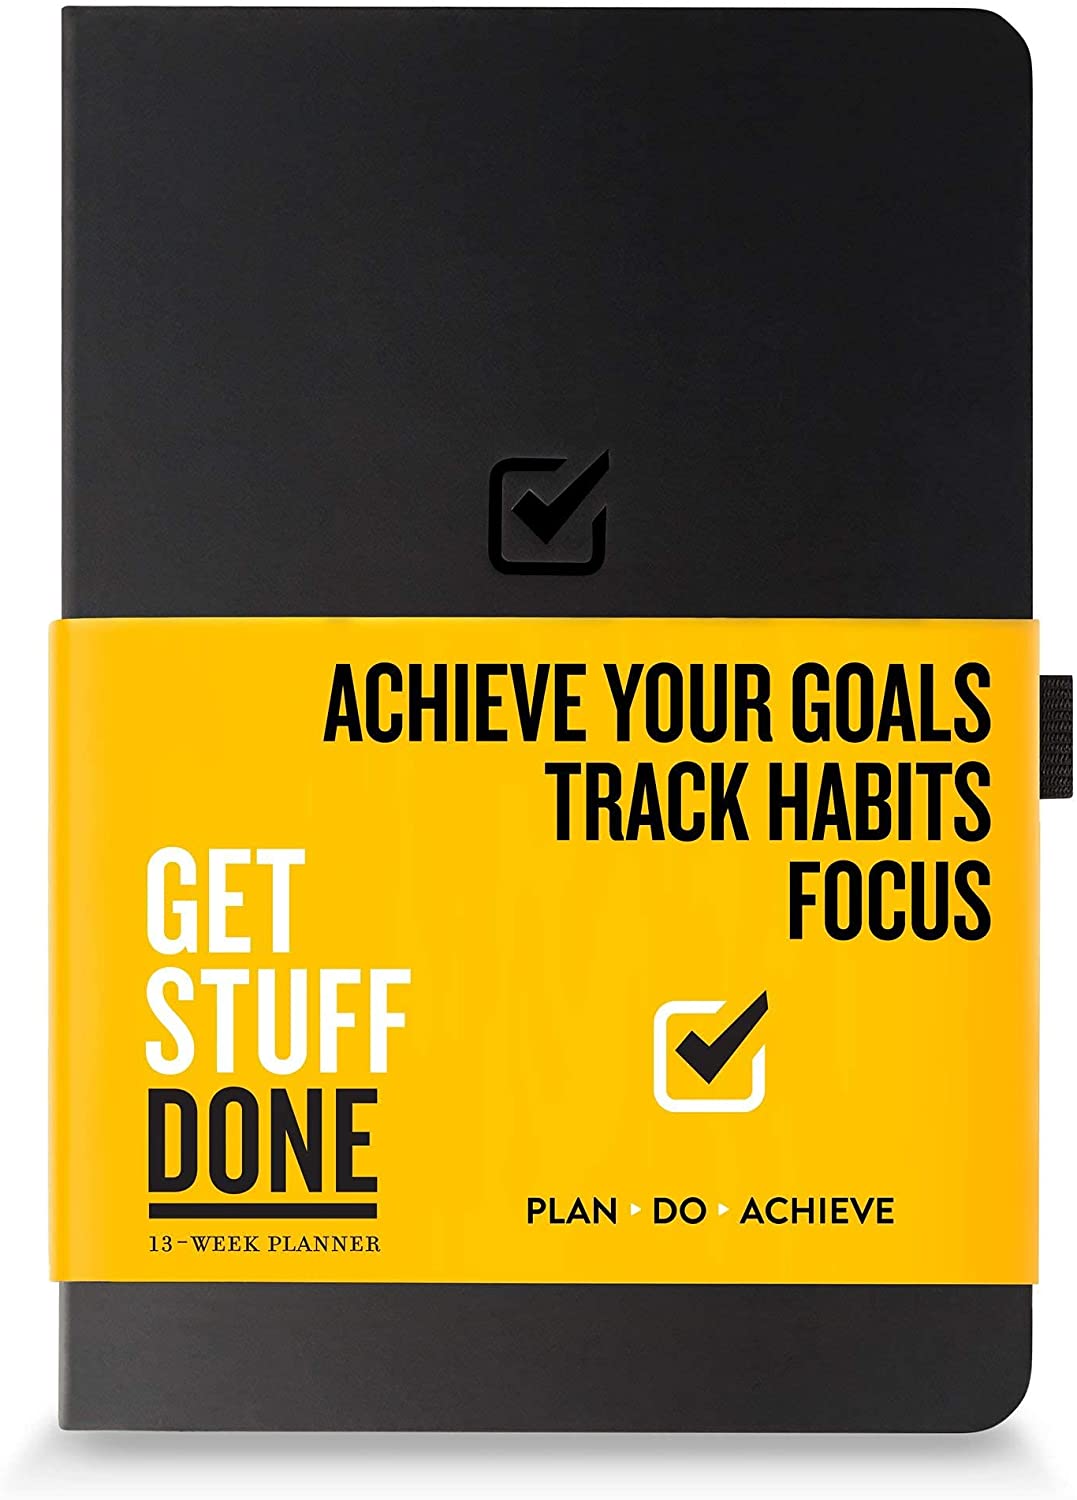 Get Stuff Done Planner for Productivity - 13 Week Undated Planner